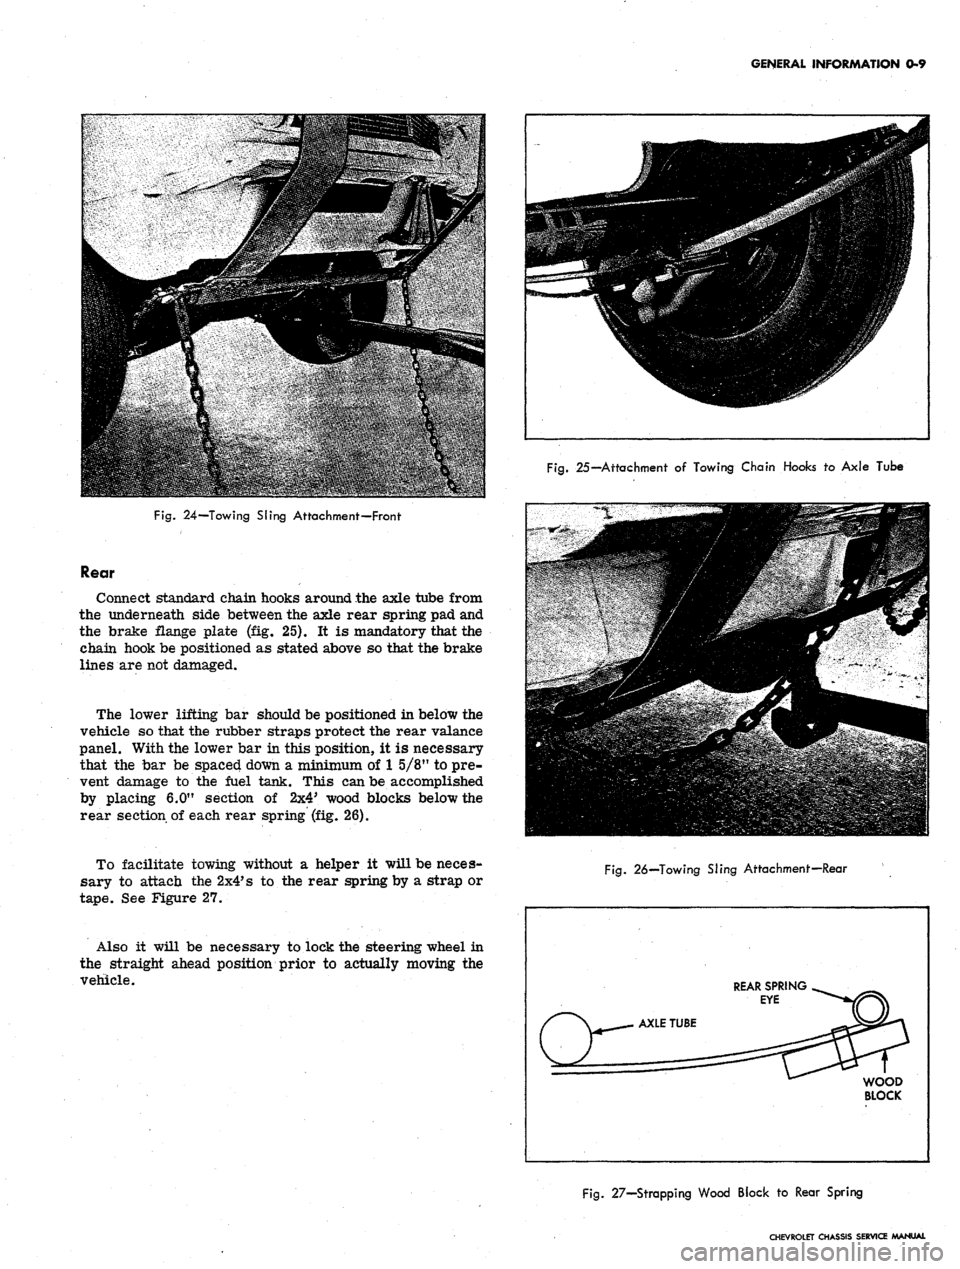 CHEVROLET CAMARO 1967 1.G Chassis Workshop Manual 
GENERAL INFORMATION
 0-9

Fig.
 25—Attachment
 of
 Towing Chain Hooks
 to
 Axle Tube

Fig.
 24—Towing Sling Attachment—Front

Rear

Connect standard chain hooks around the axle tube from

the u